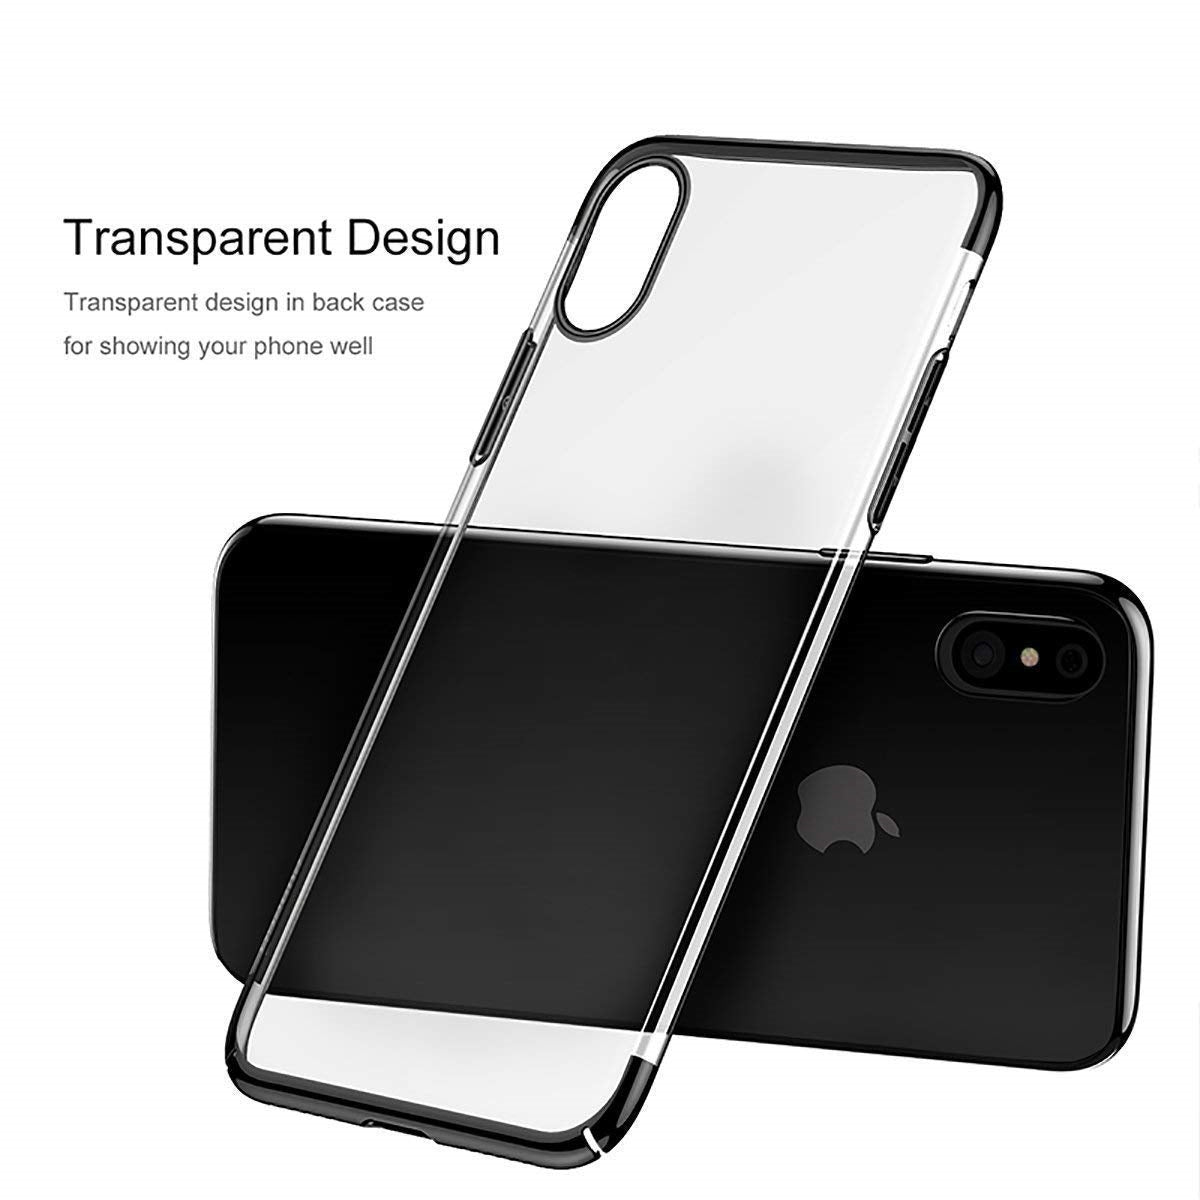 iPhone Xs Max 6.5'' 2018 Clear Case, AICase Shinning Electroplating Design PC Bumper Clear Back Protective Cover Bumper for Apple iPhone Xs Max 6.5